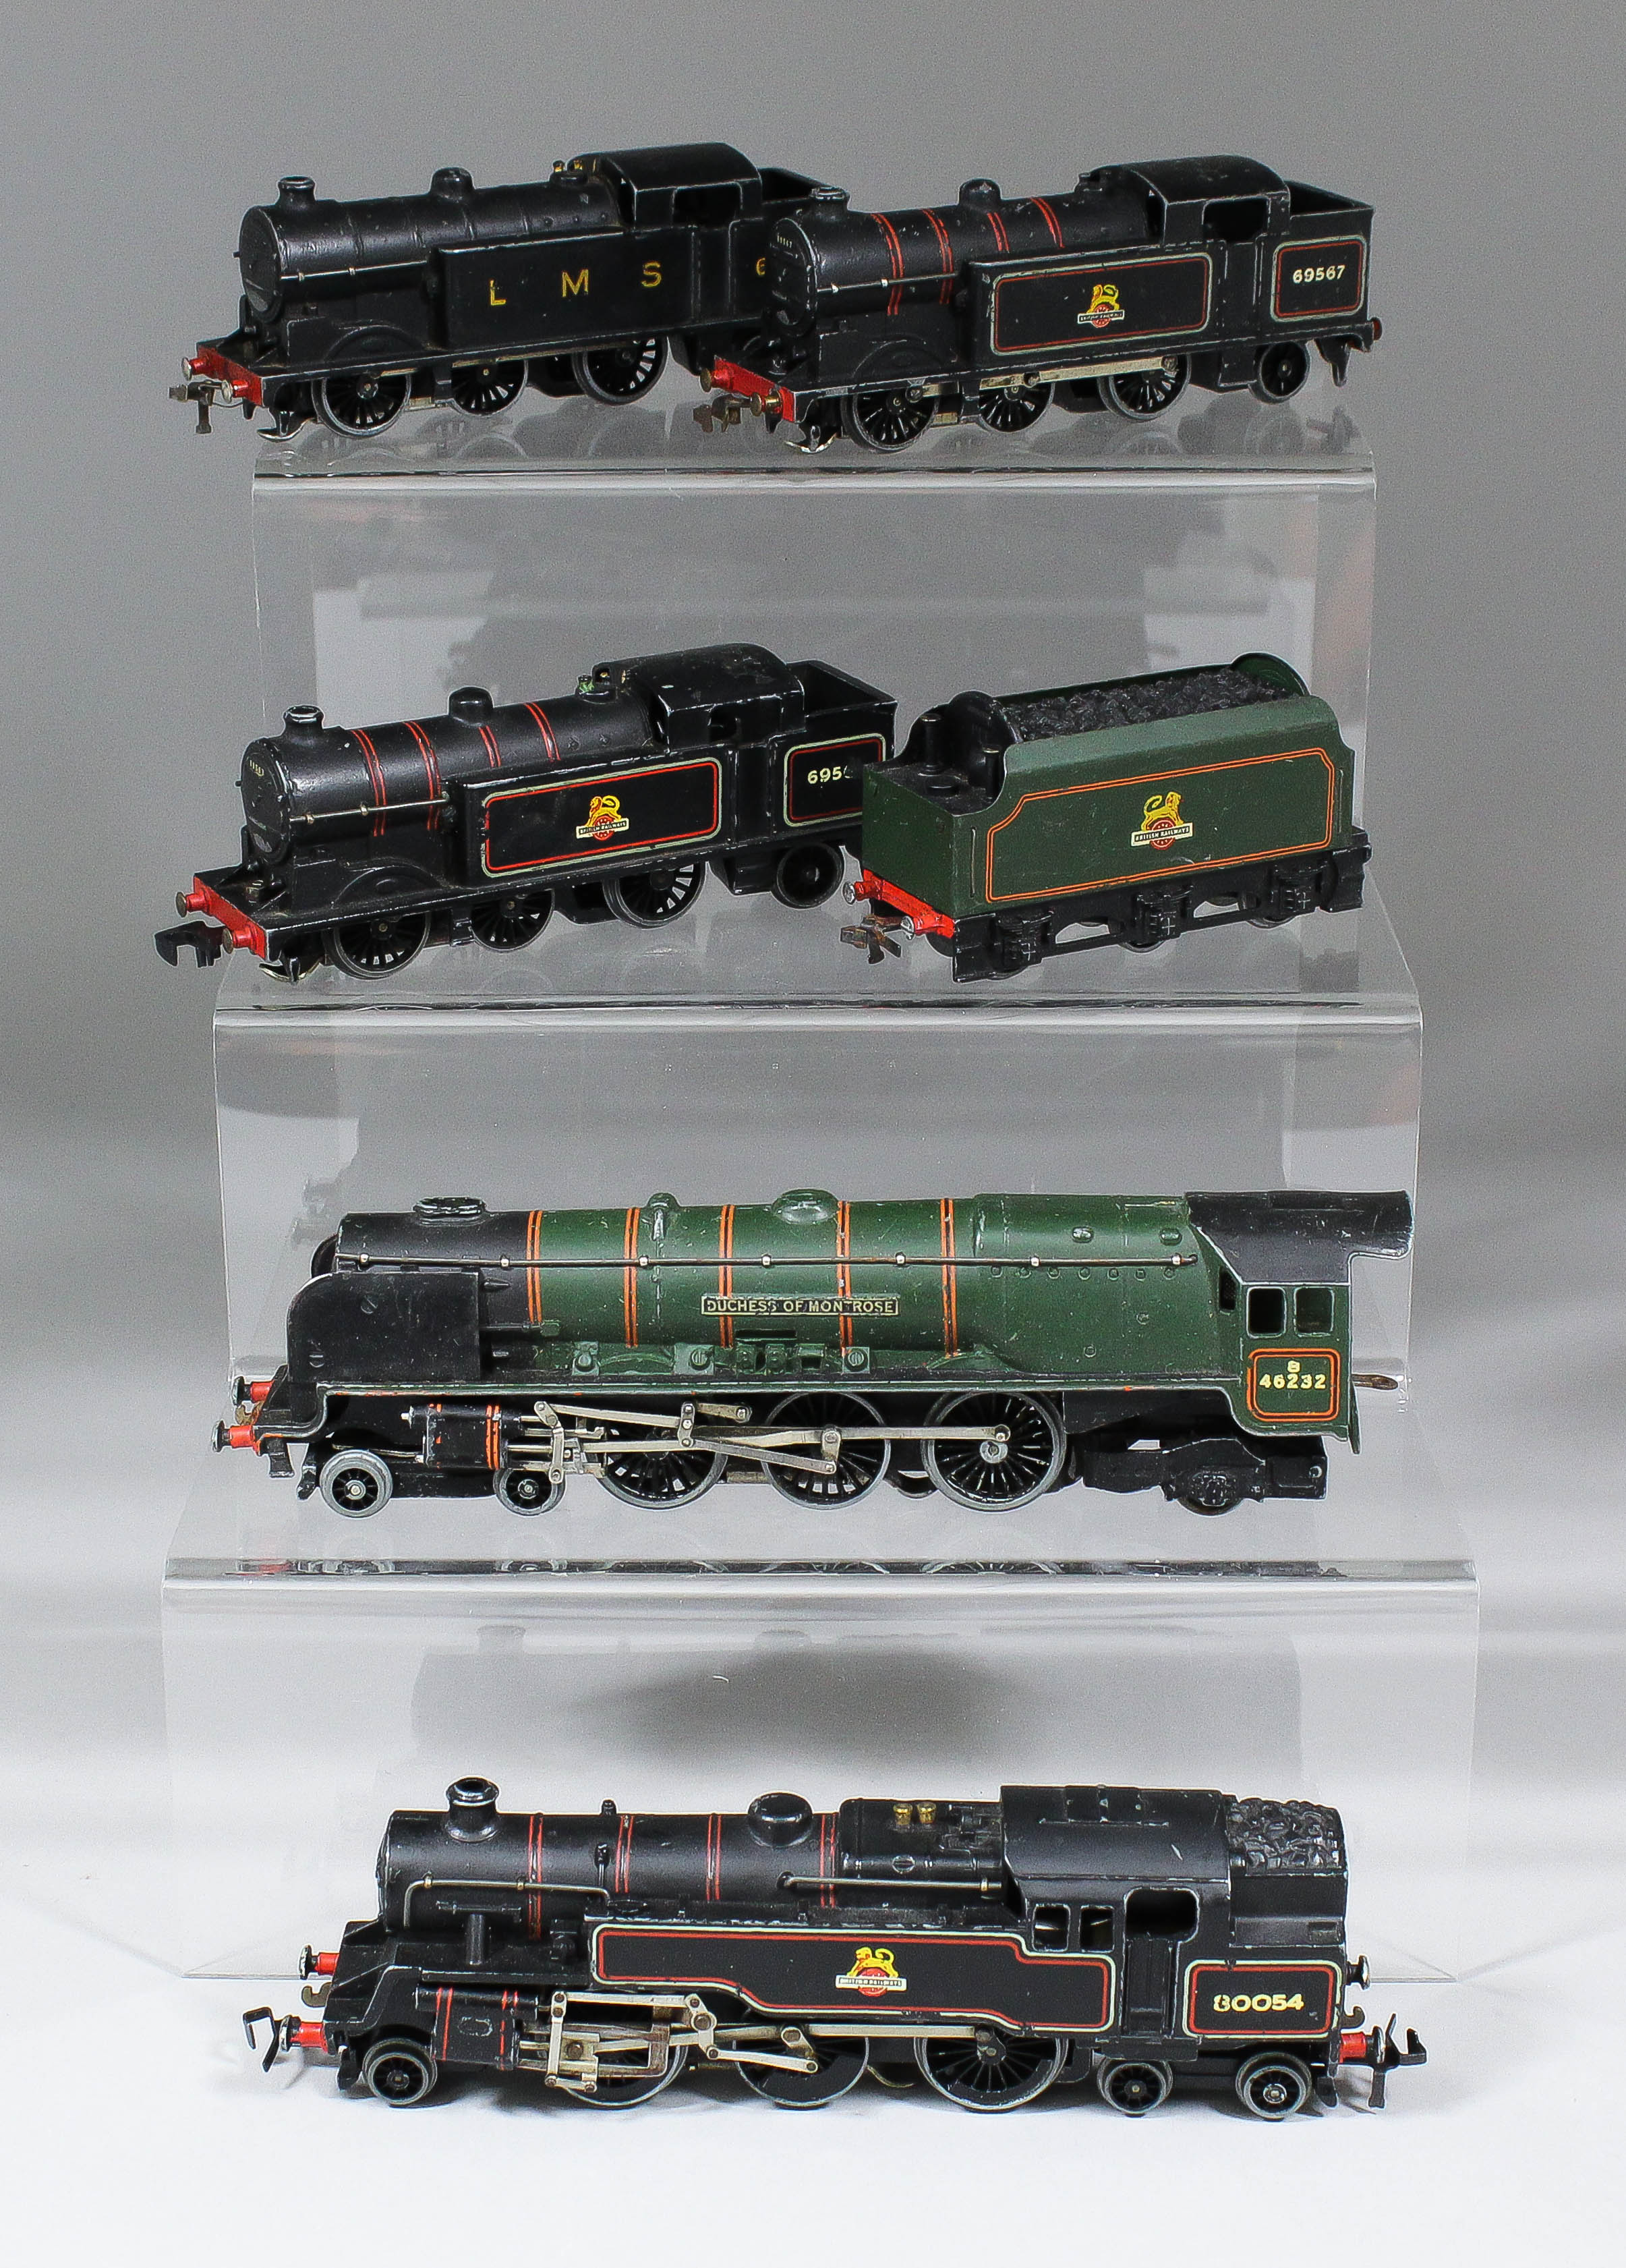 A small collection of Hornby `OO` gauge steam engines, including - ""Duchess of Montrose"" in green